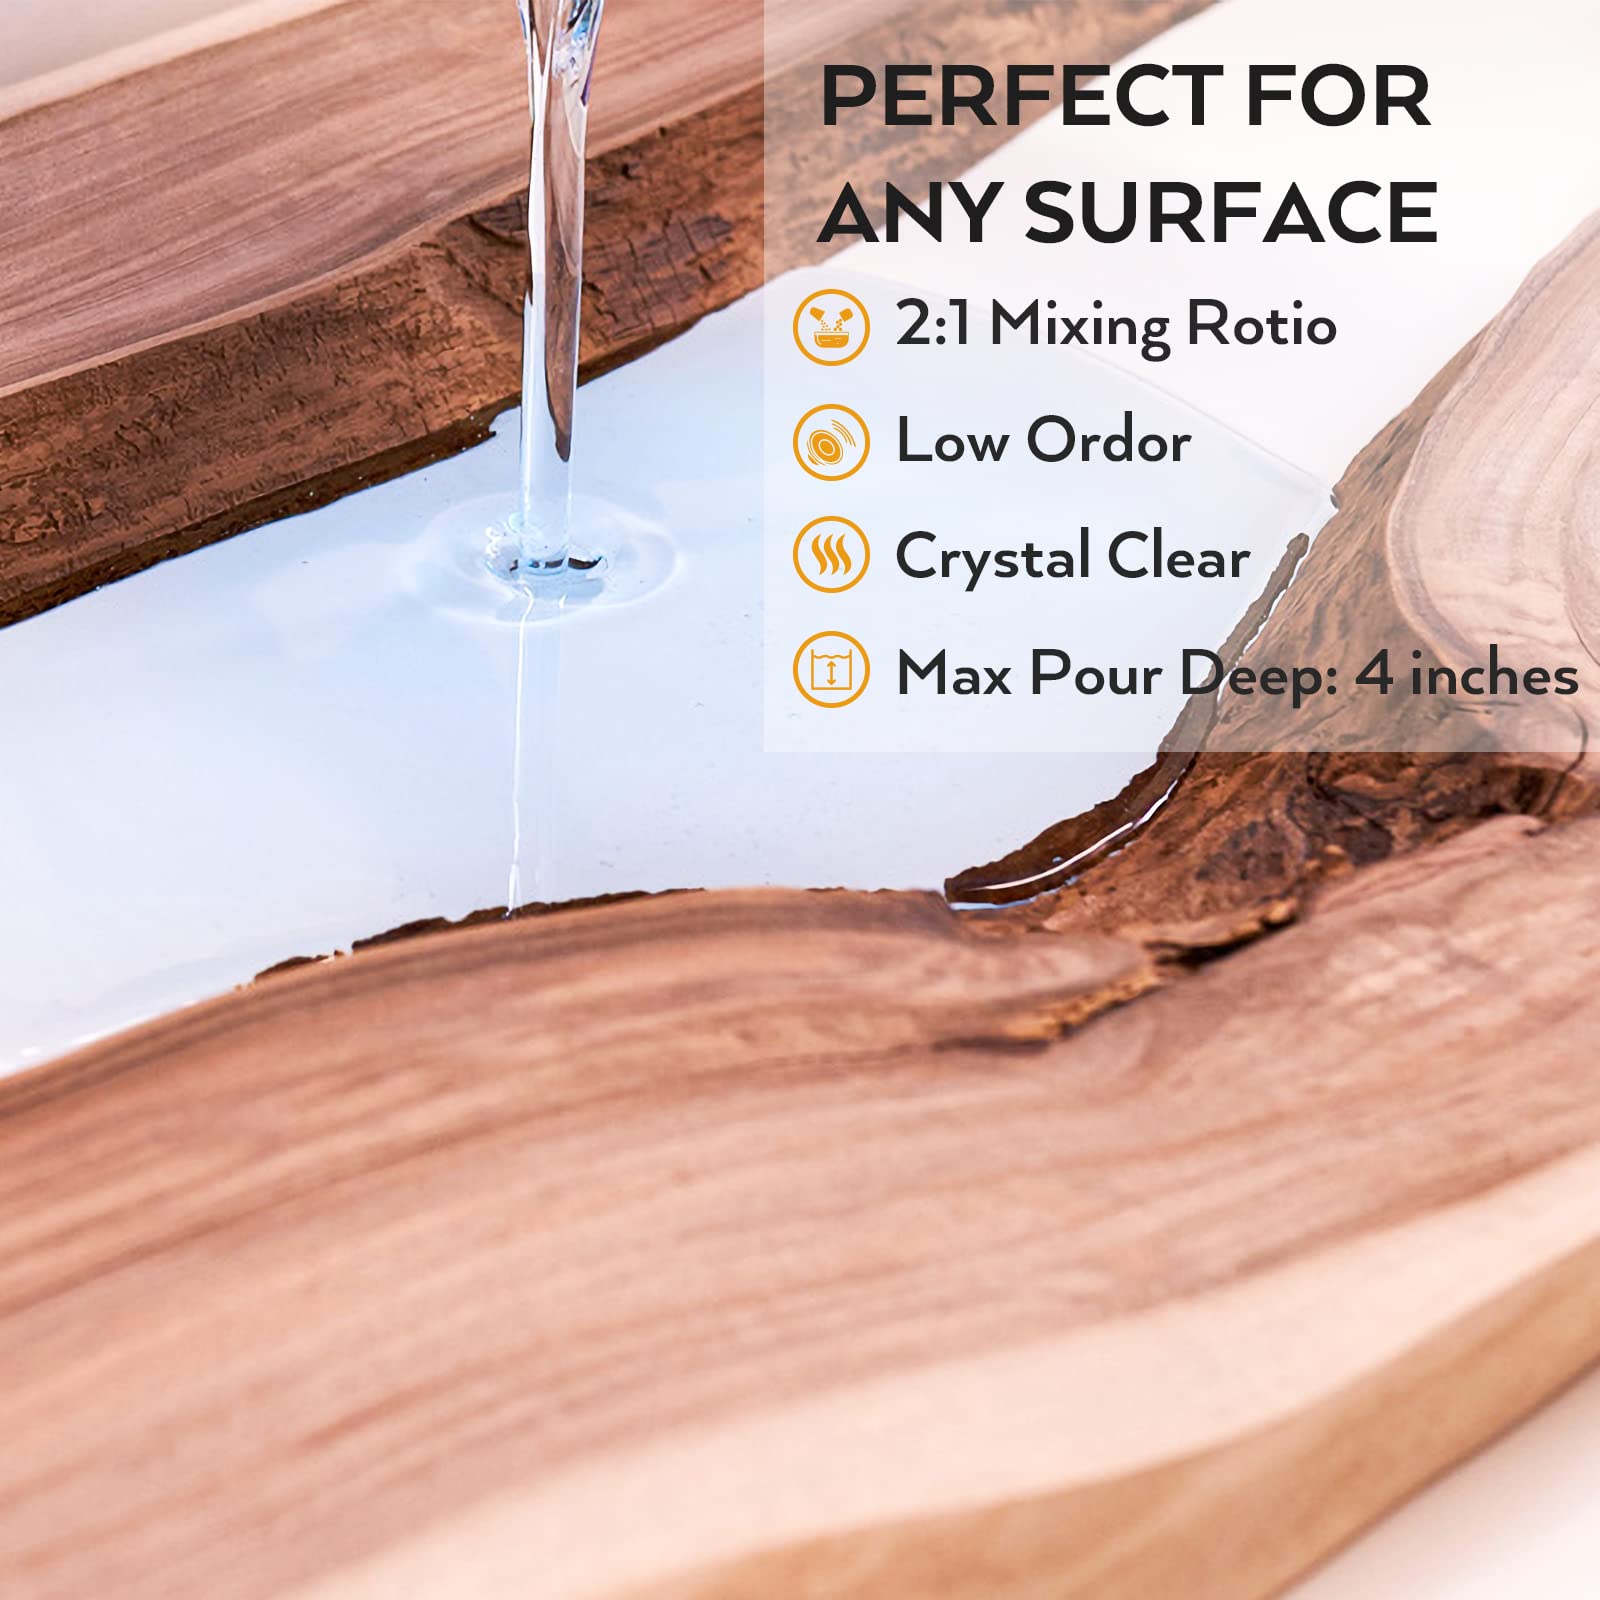 Nicpro 3 Gallon Deep Pour Epoxy Resin Kit, 2 to 4 Inch Depth Crystal Clear & High Gloss, Bubble Free Epoxy Resin for Craft River Table, Wood Filler, Bar Top, Coating, Casting, Food Safe Self Level 2:1